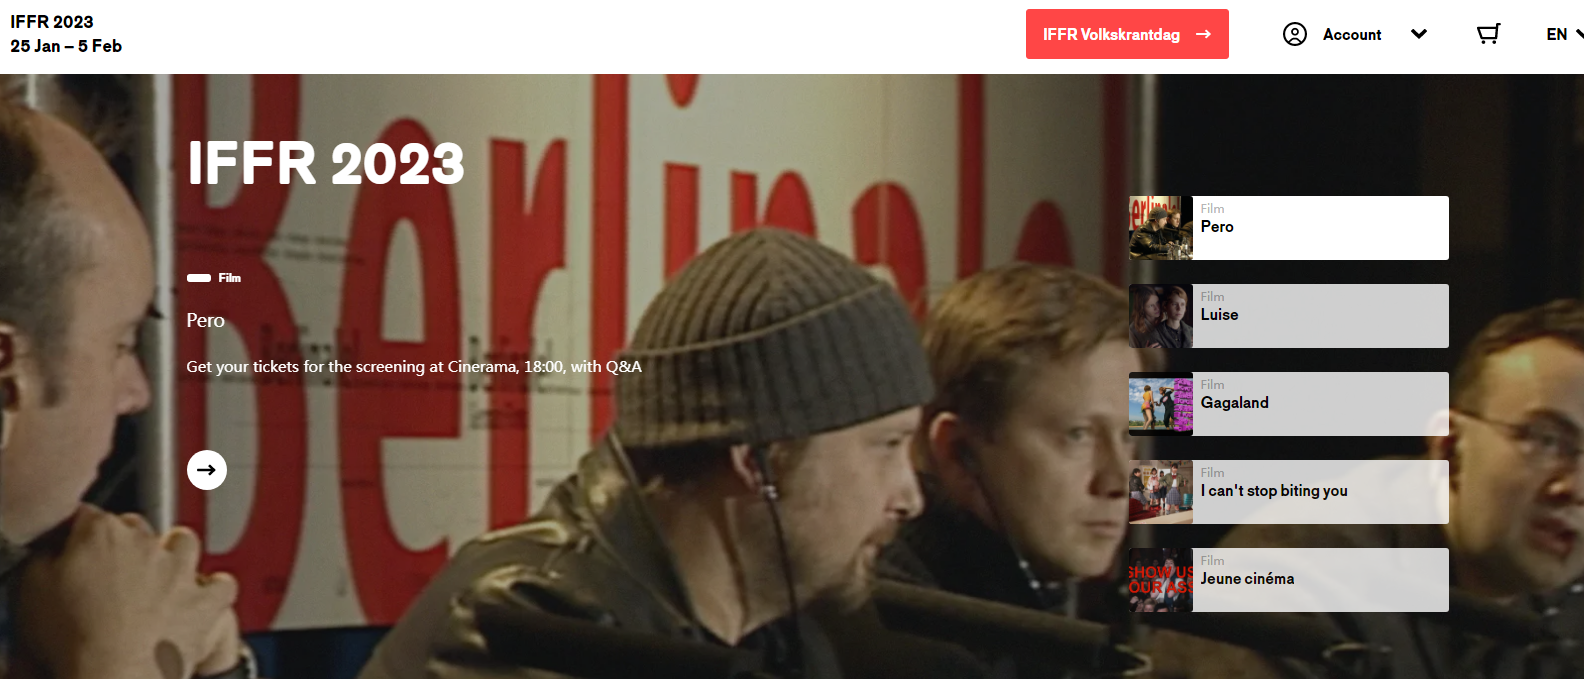 How to watch the International Film Festival Rotterdam (IFFR) online outside the Netherlands with a VPN